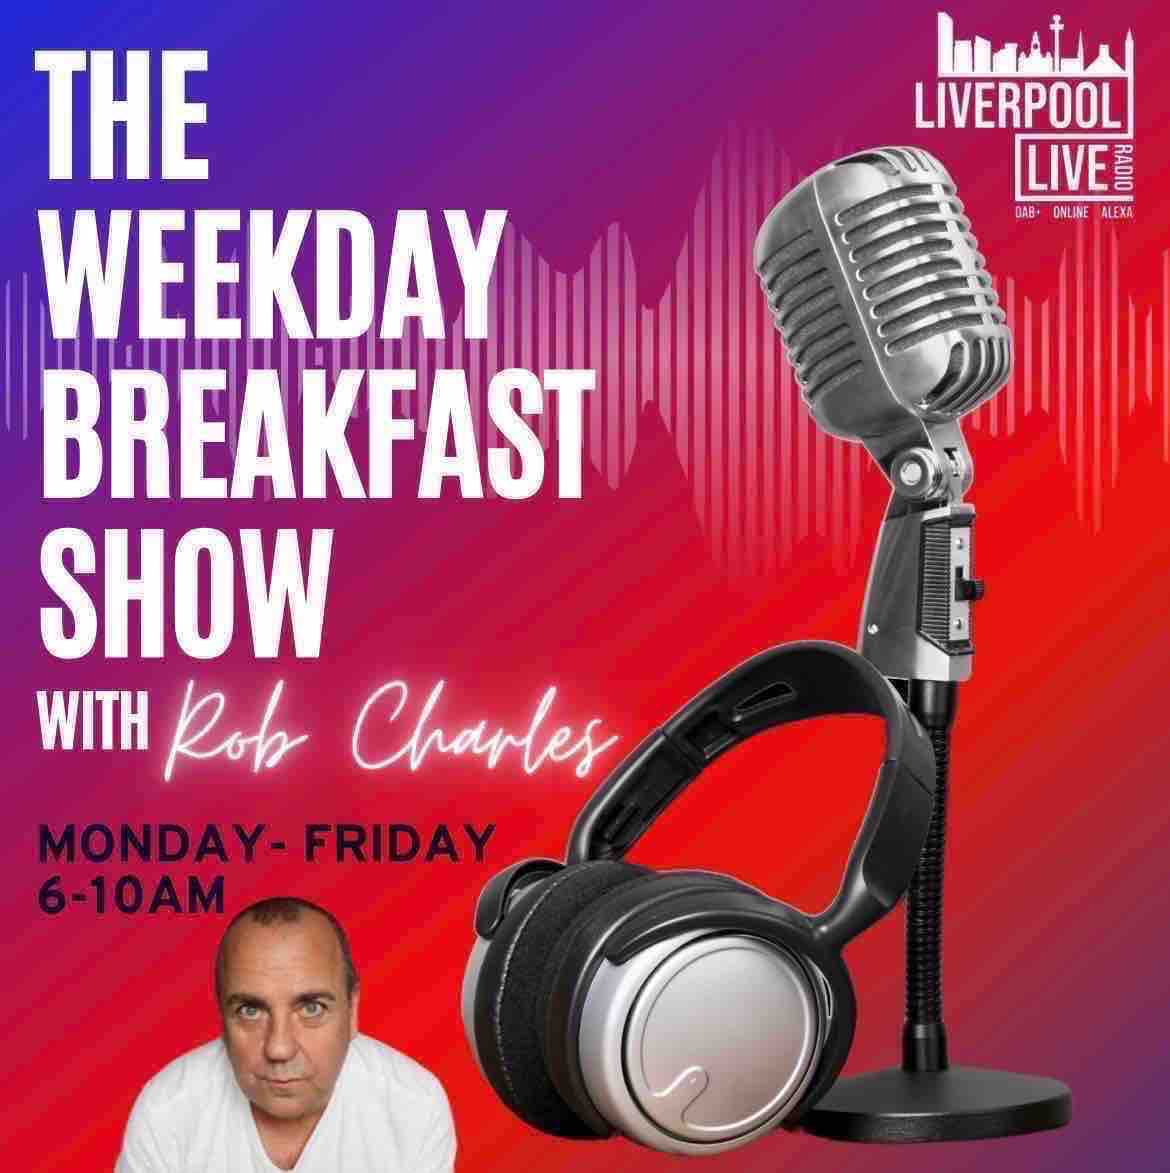 Wakey wakey rise and shine it’s time for Rob Charles breakfast show time ! Tune in on DAB+ • Alexa • Online • Free view TV ch 277